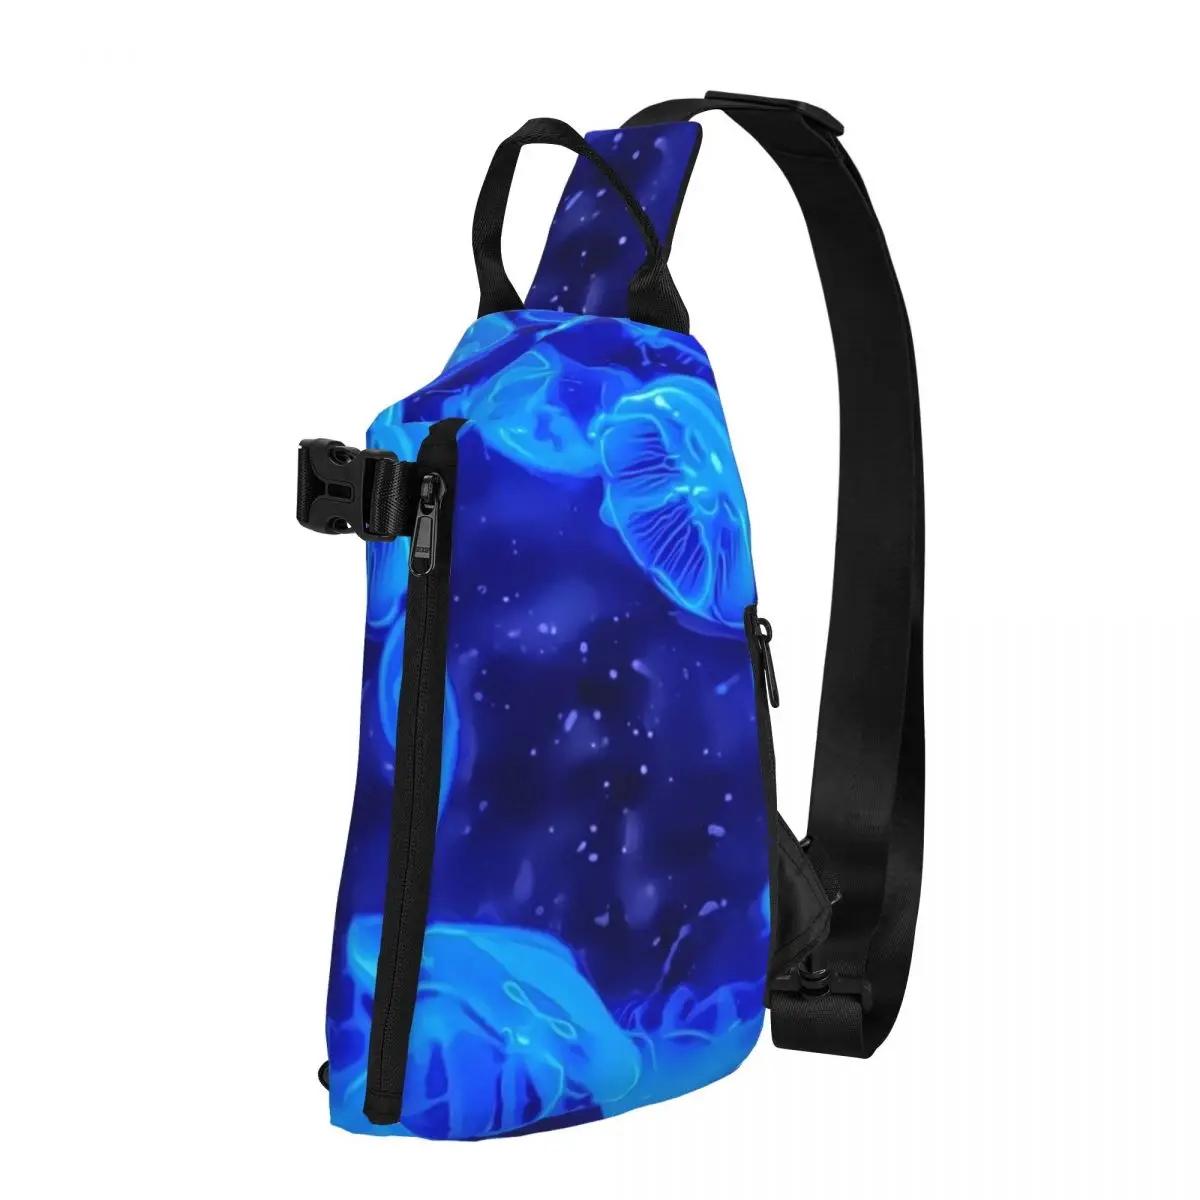 

Tropical Marine Print Chest Bags Men Blue Jelly Fish Graphic Shoulder Bag Funny High School Crossbody Bag Sport Daily Sling Bags